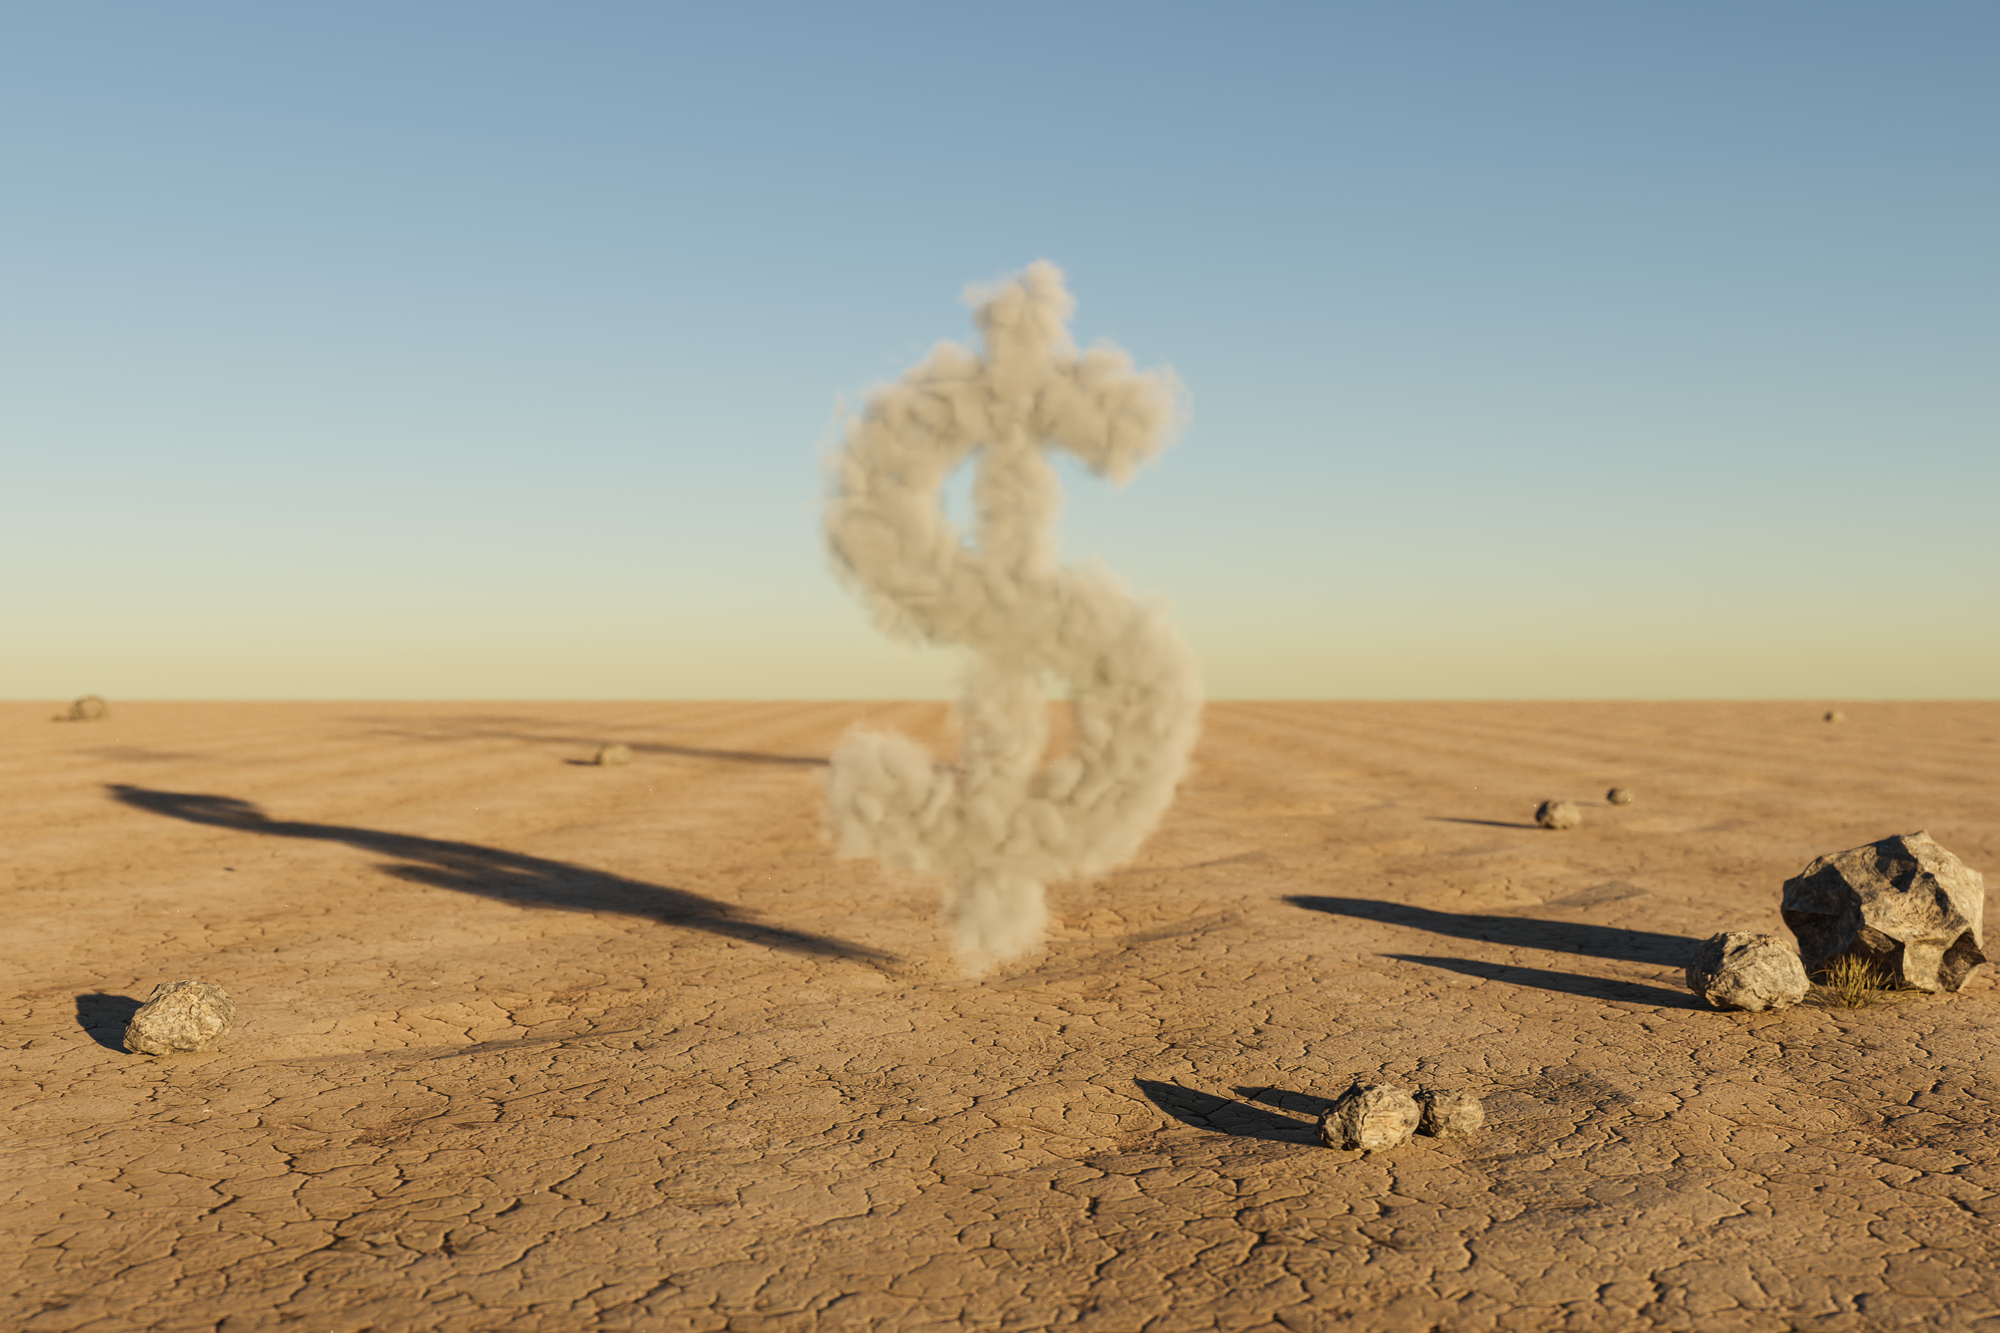 small cloud dollar symbol in large desert environment with sand dunes, hills and rocks laying arround; business profit concept; 3D Illustration